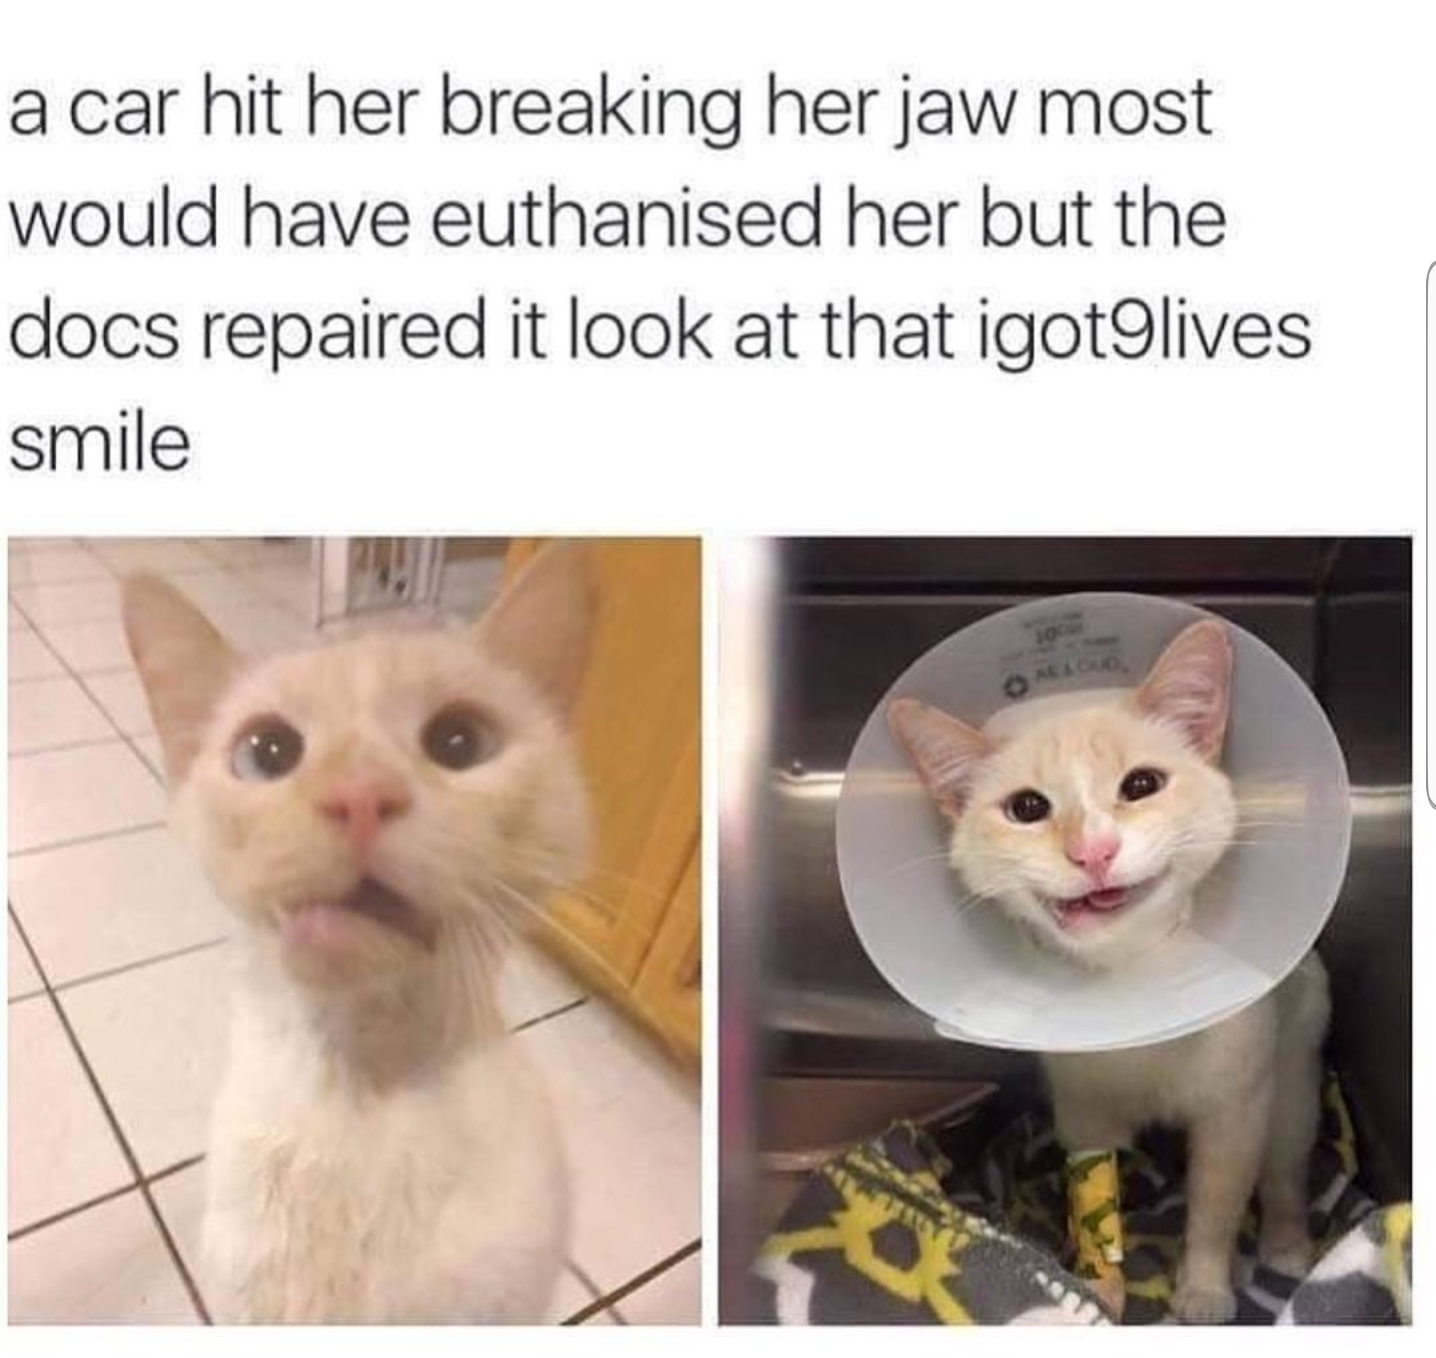 cat with a broken jaw - a car hit her breaking her jaw most would have euthanised her but the docs repaired it look at that igot9lives smile